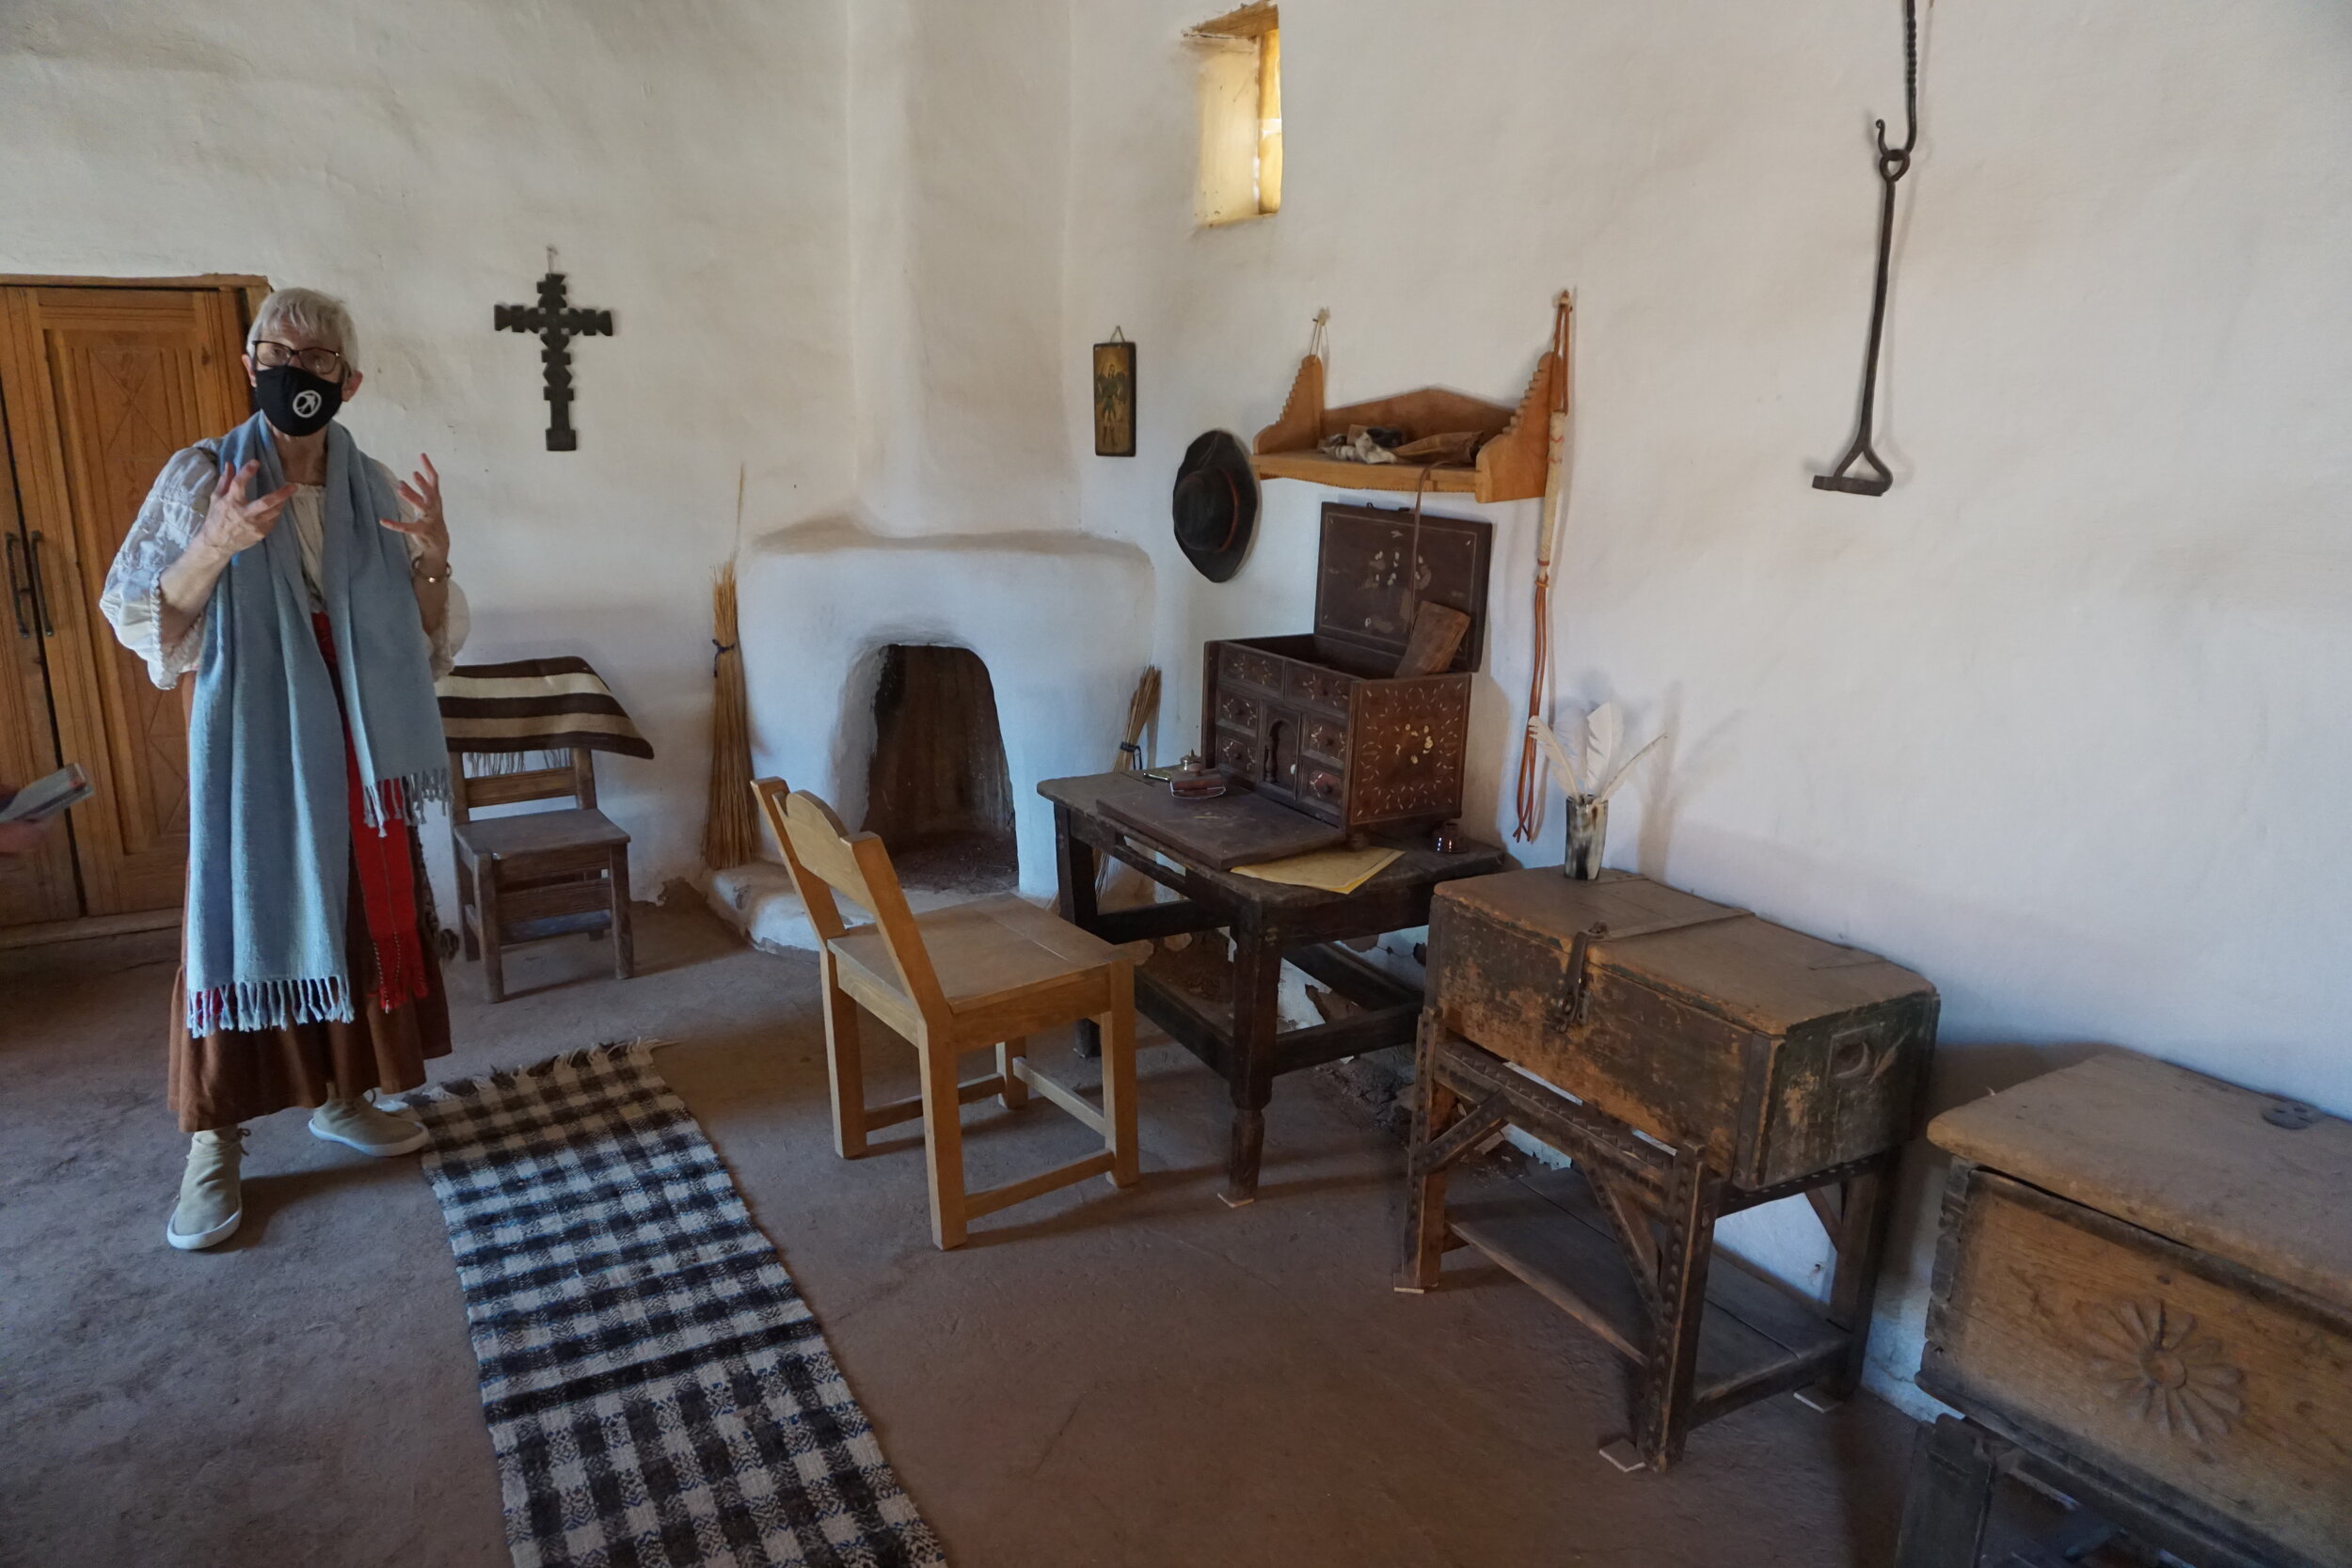 Inside of a home on historic ranch in Santa Fe, New Mexico